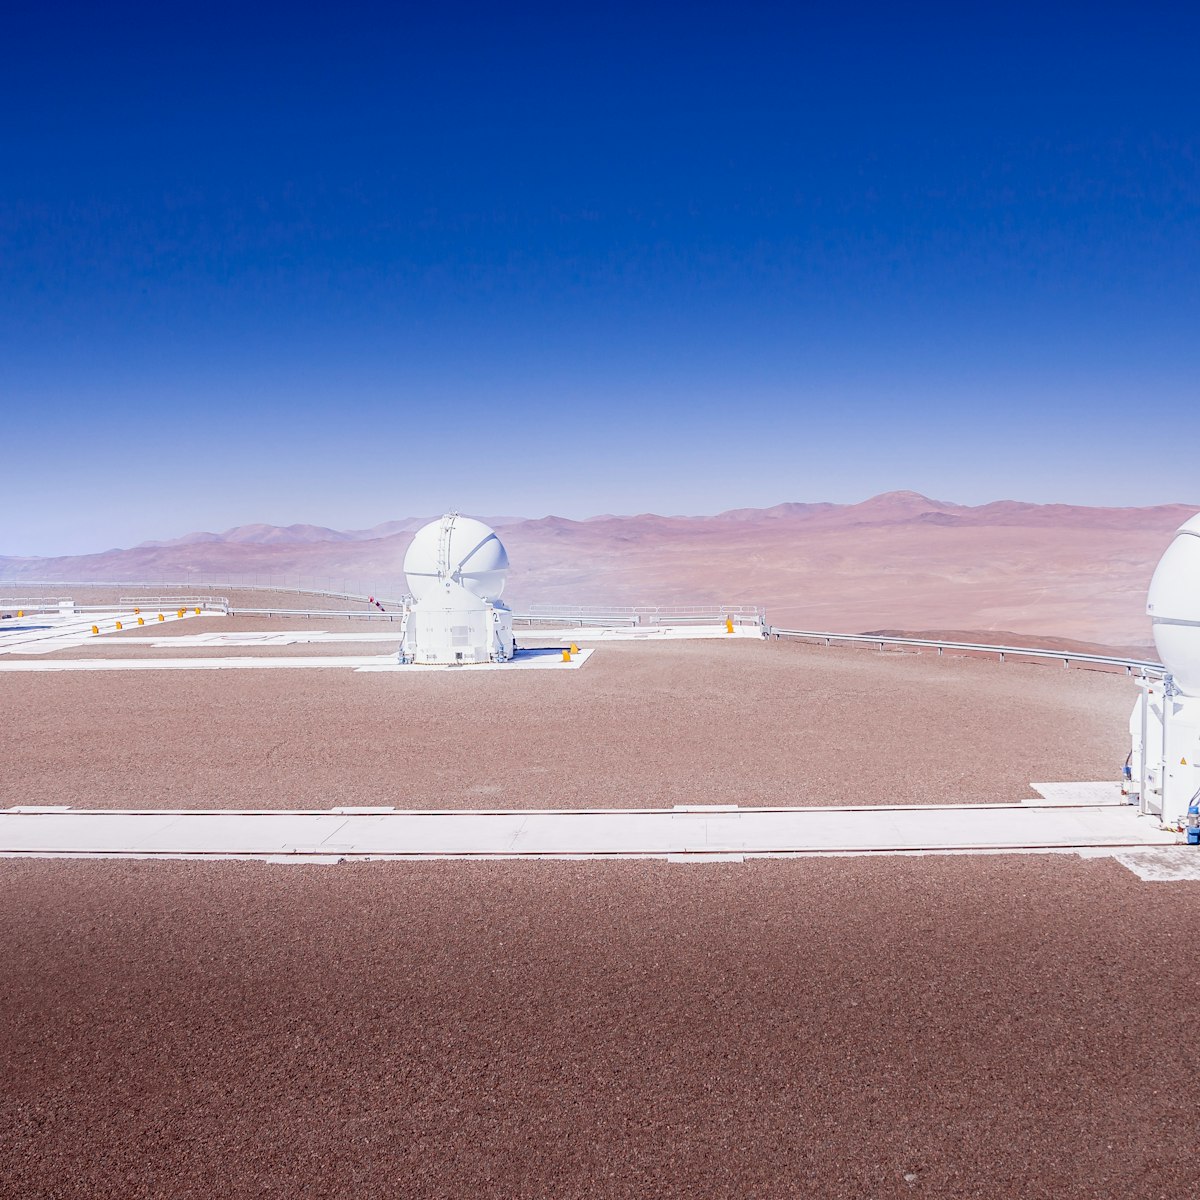  The VLT, Very Large Telescope complex at the European Southern Observatory located on Cerro Paranal in the middle of the Atacama desert in Chile.